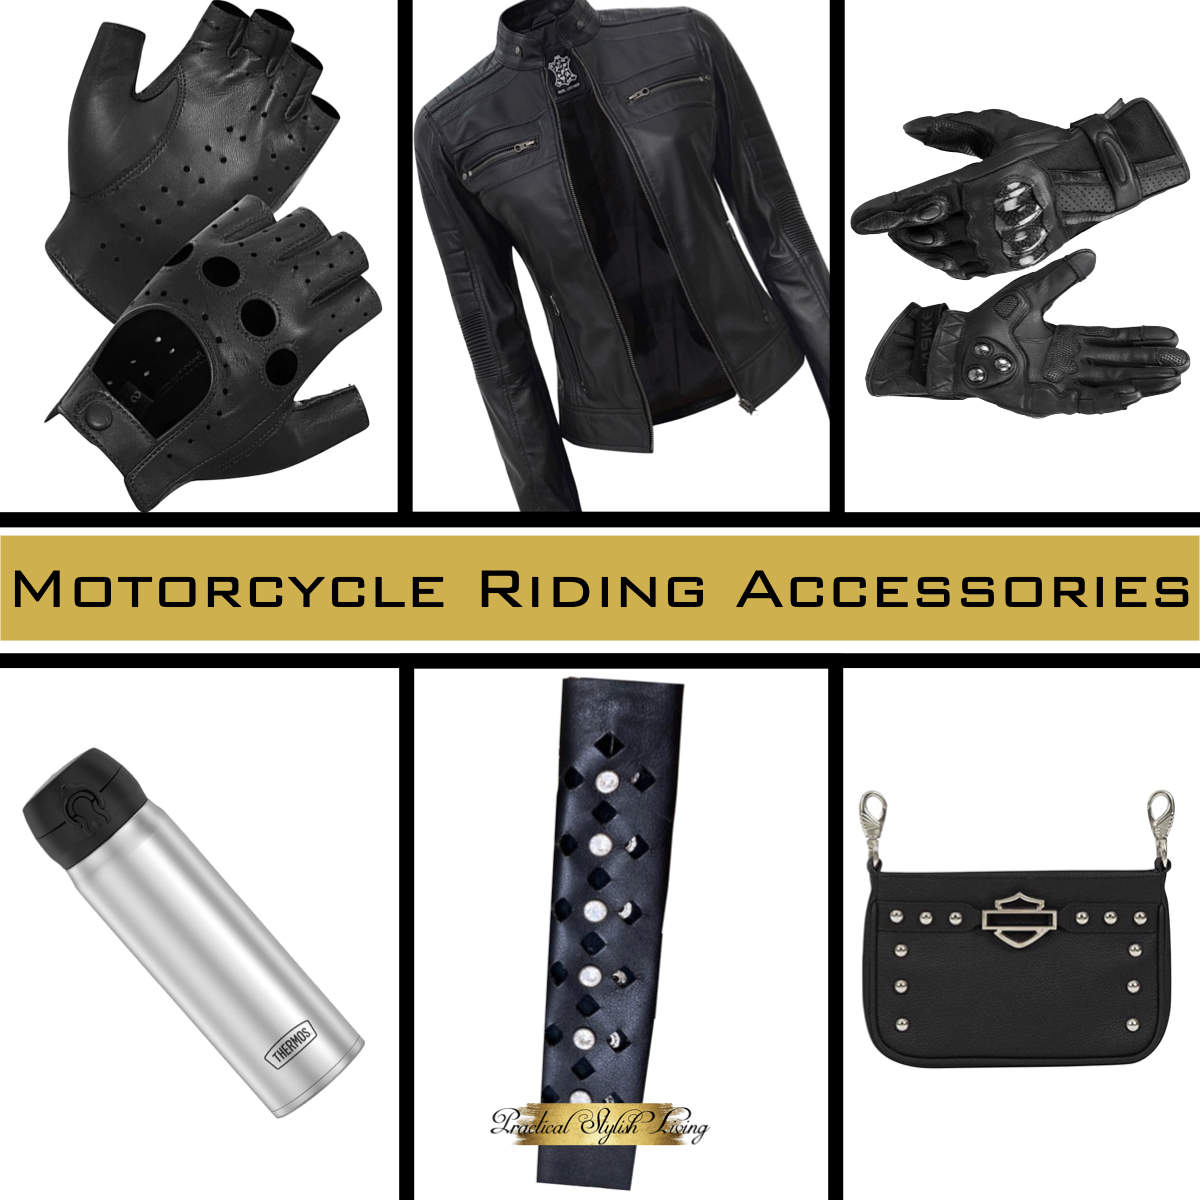 Motorcycle riding accessories for women and men.